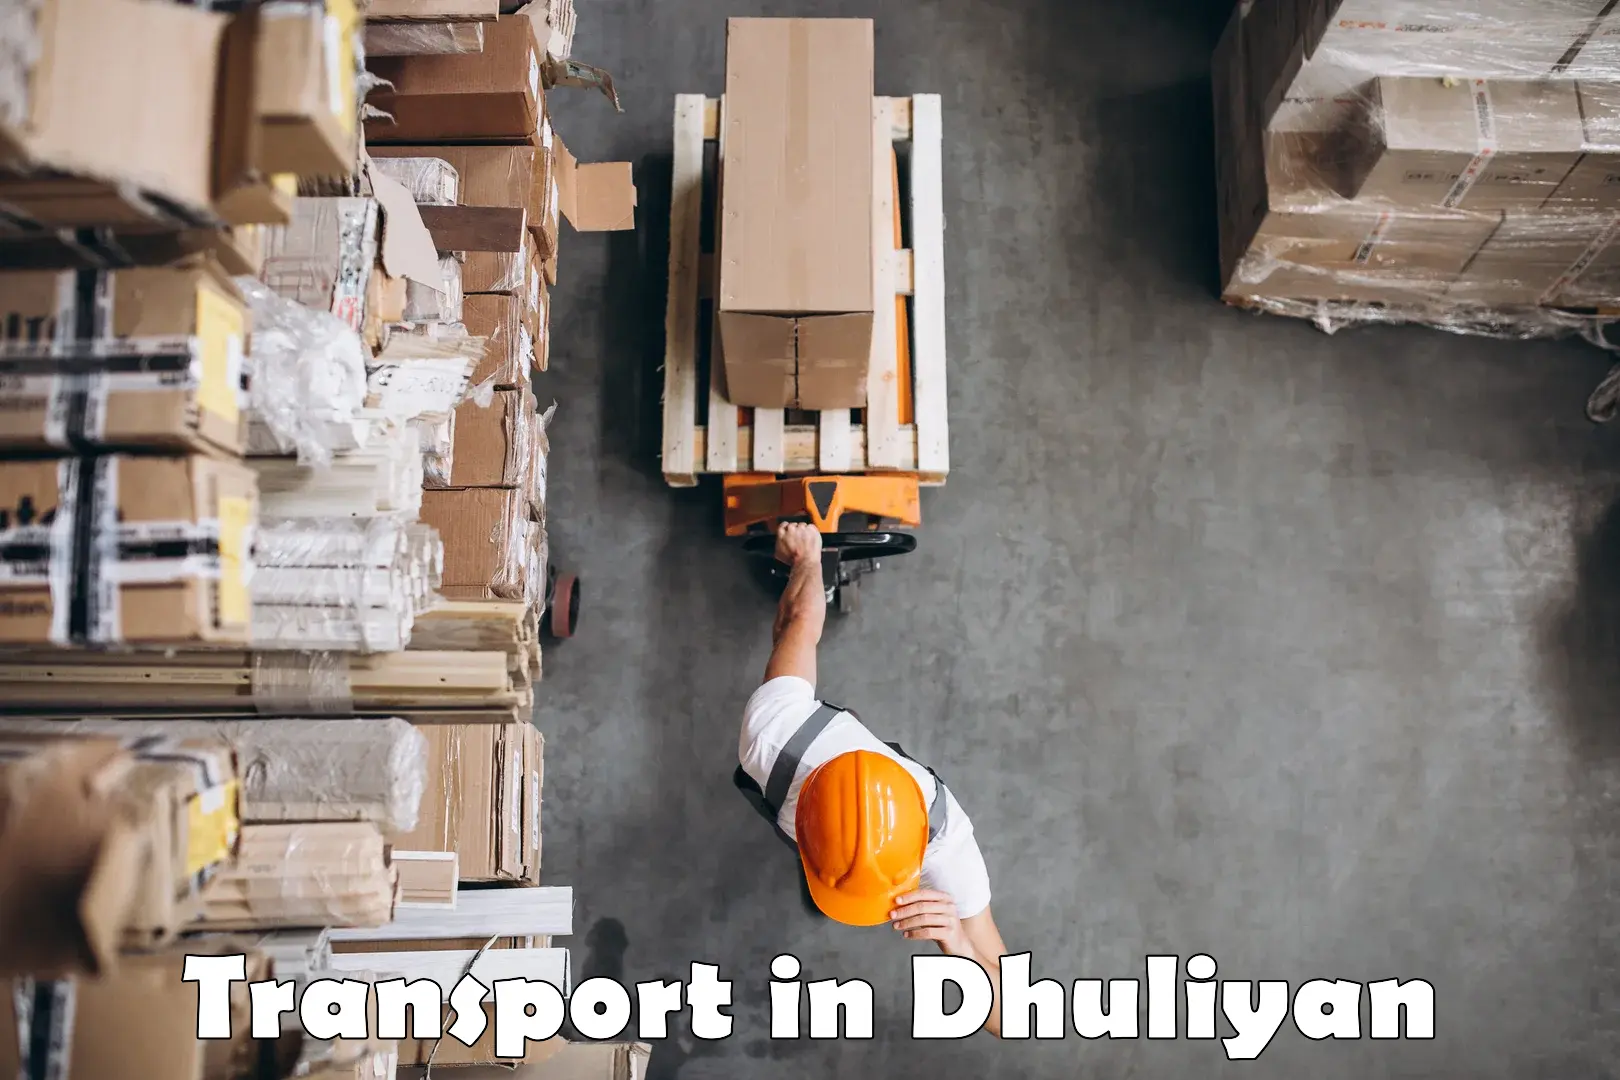 Daily parcel service transport in Dhuliyan